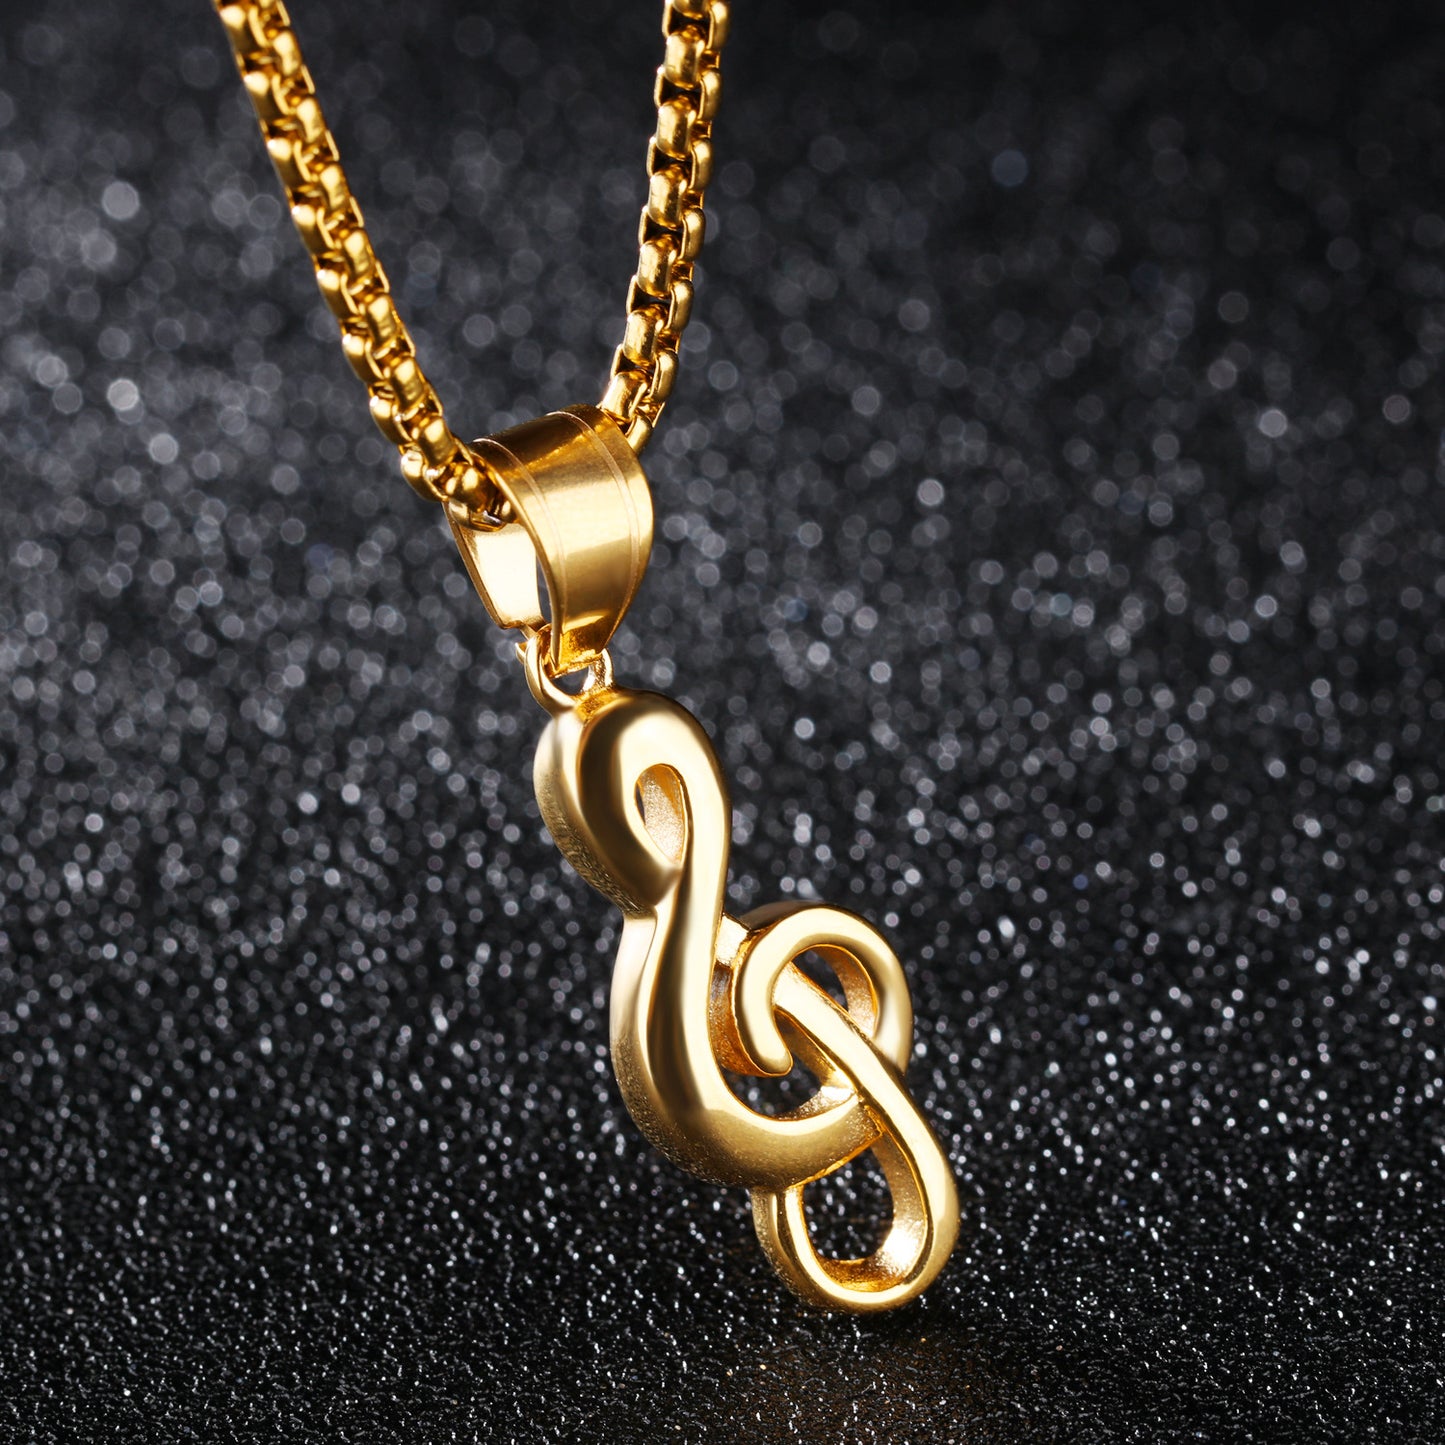 treble clef necklace gold with chain